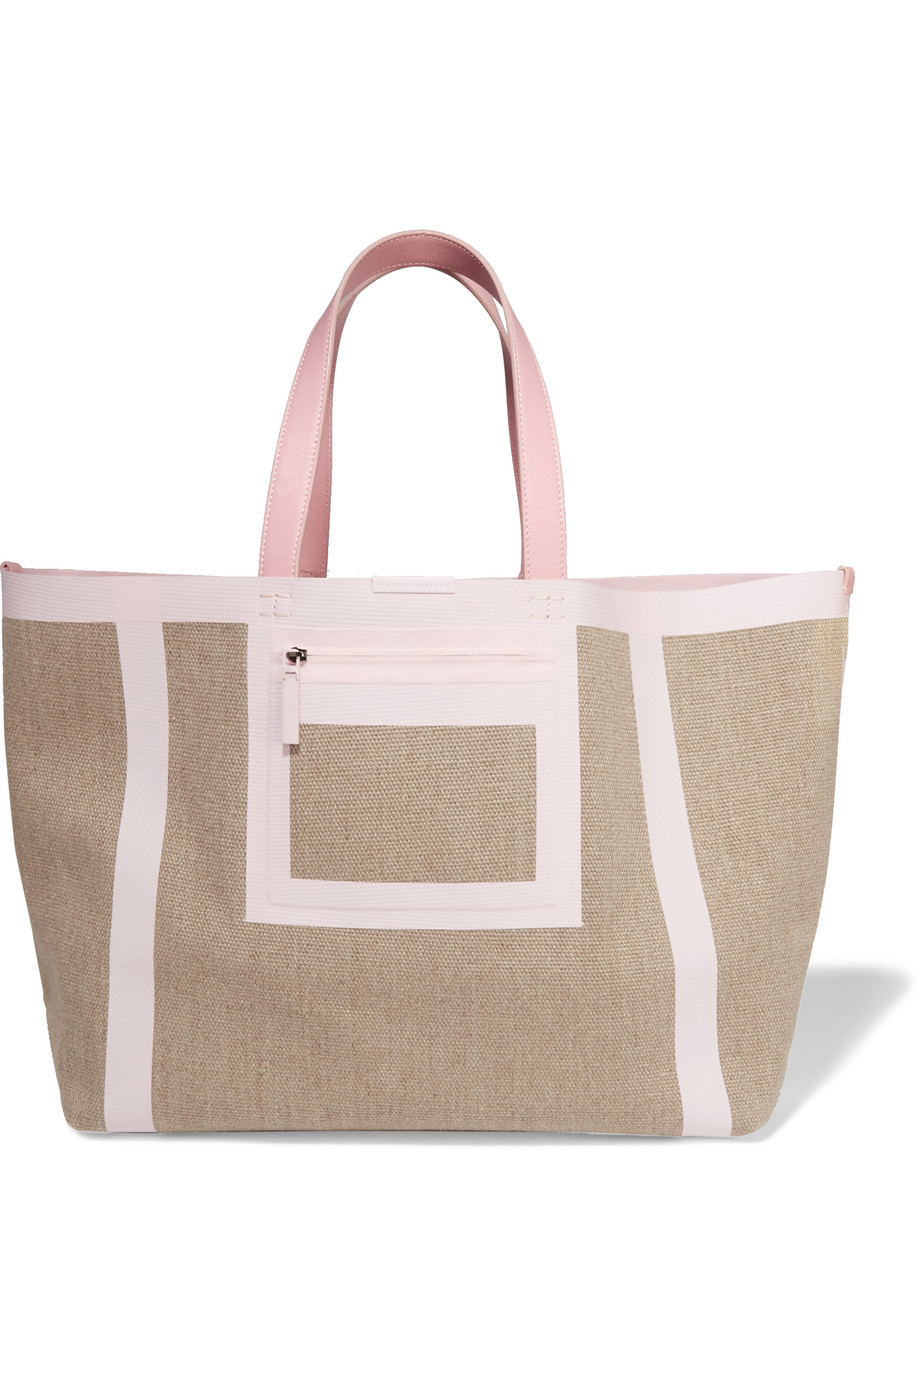 Victoria Beckham Simple Leather-trimmed Canvas Tote | ModeSens